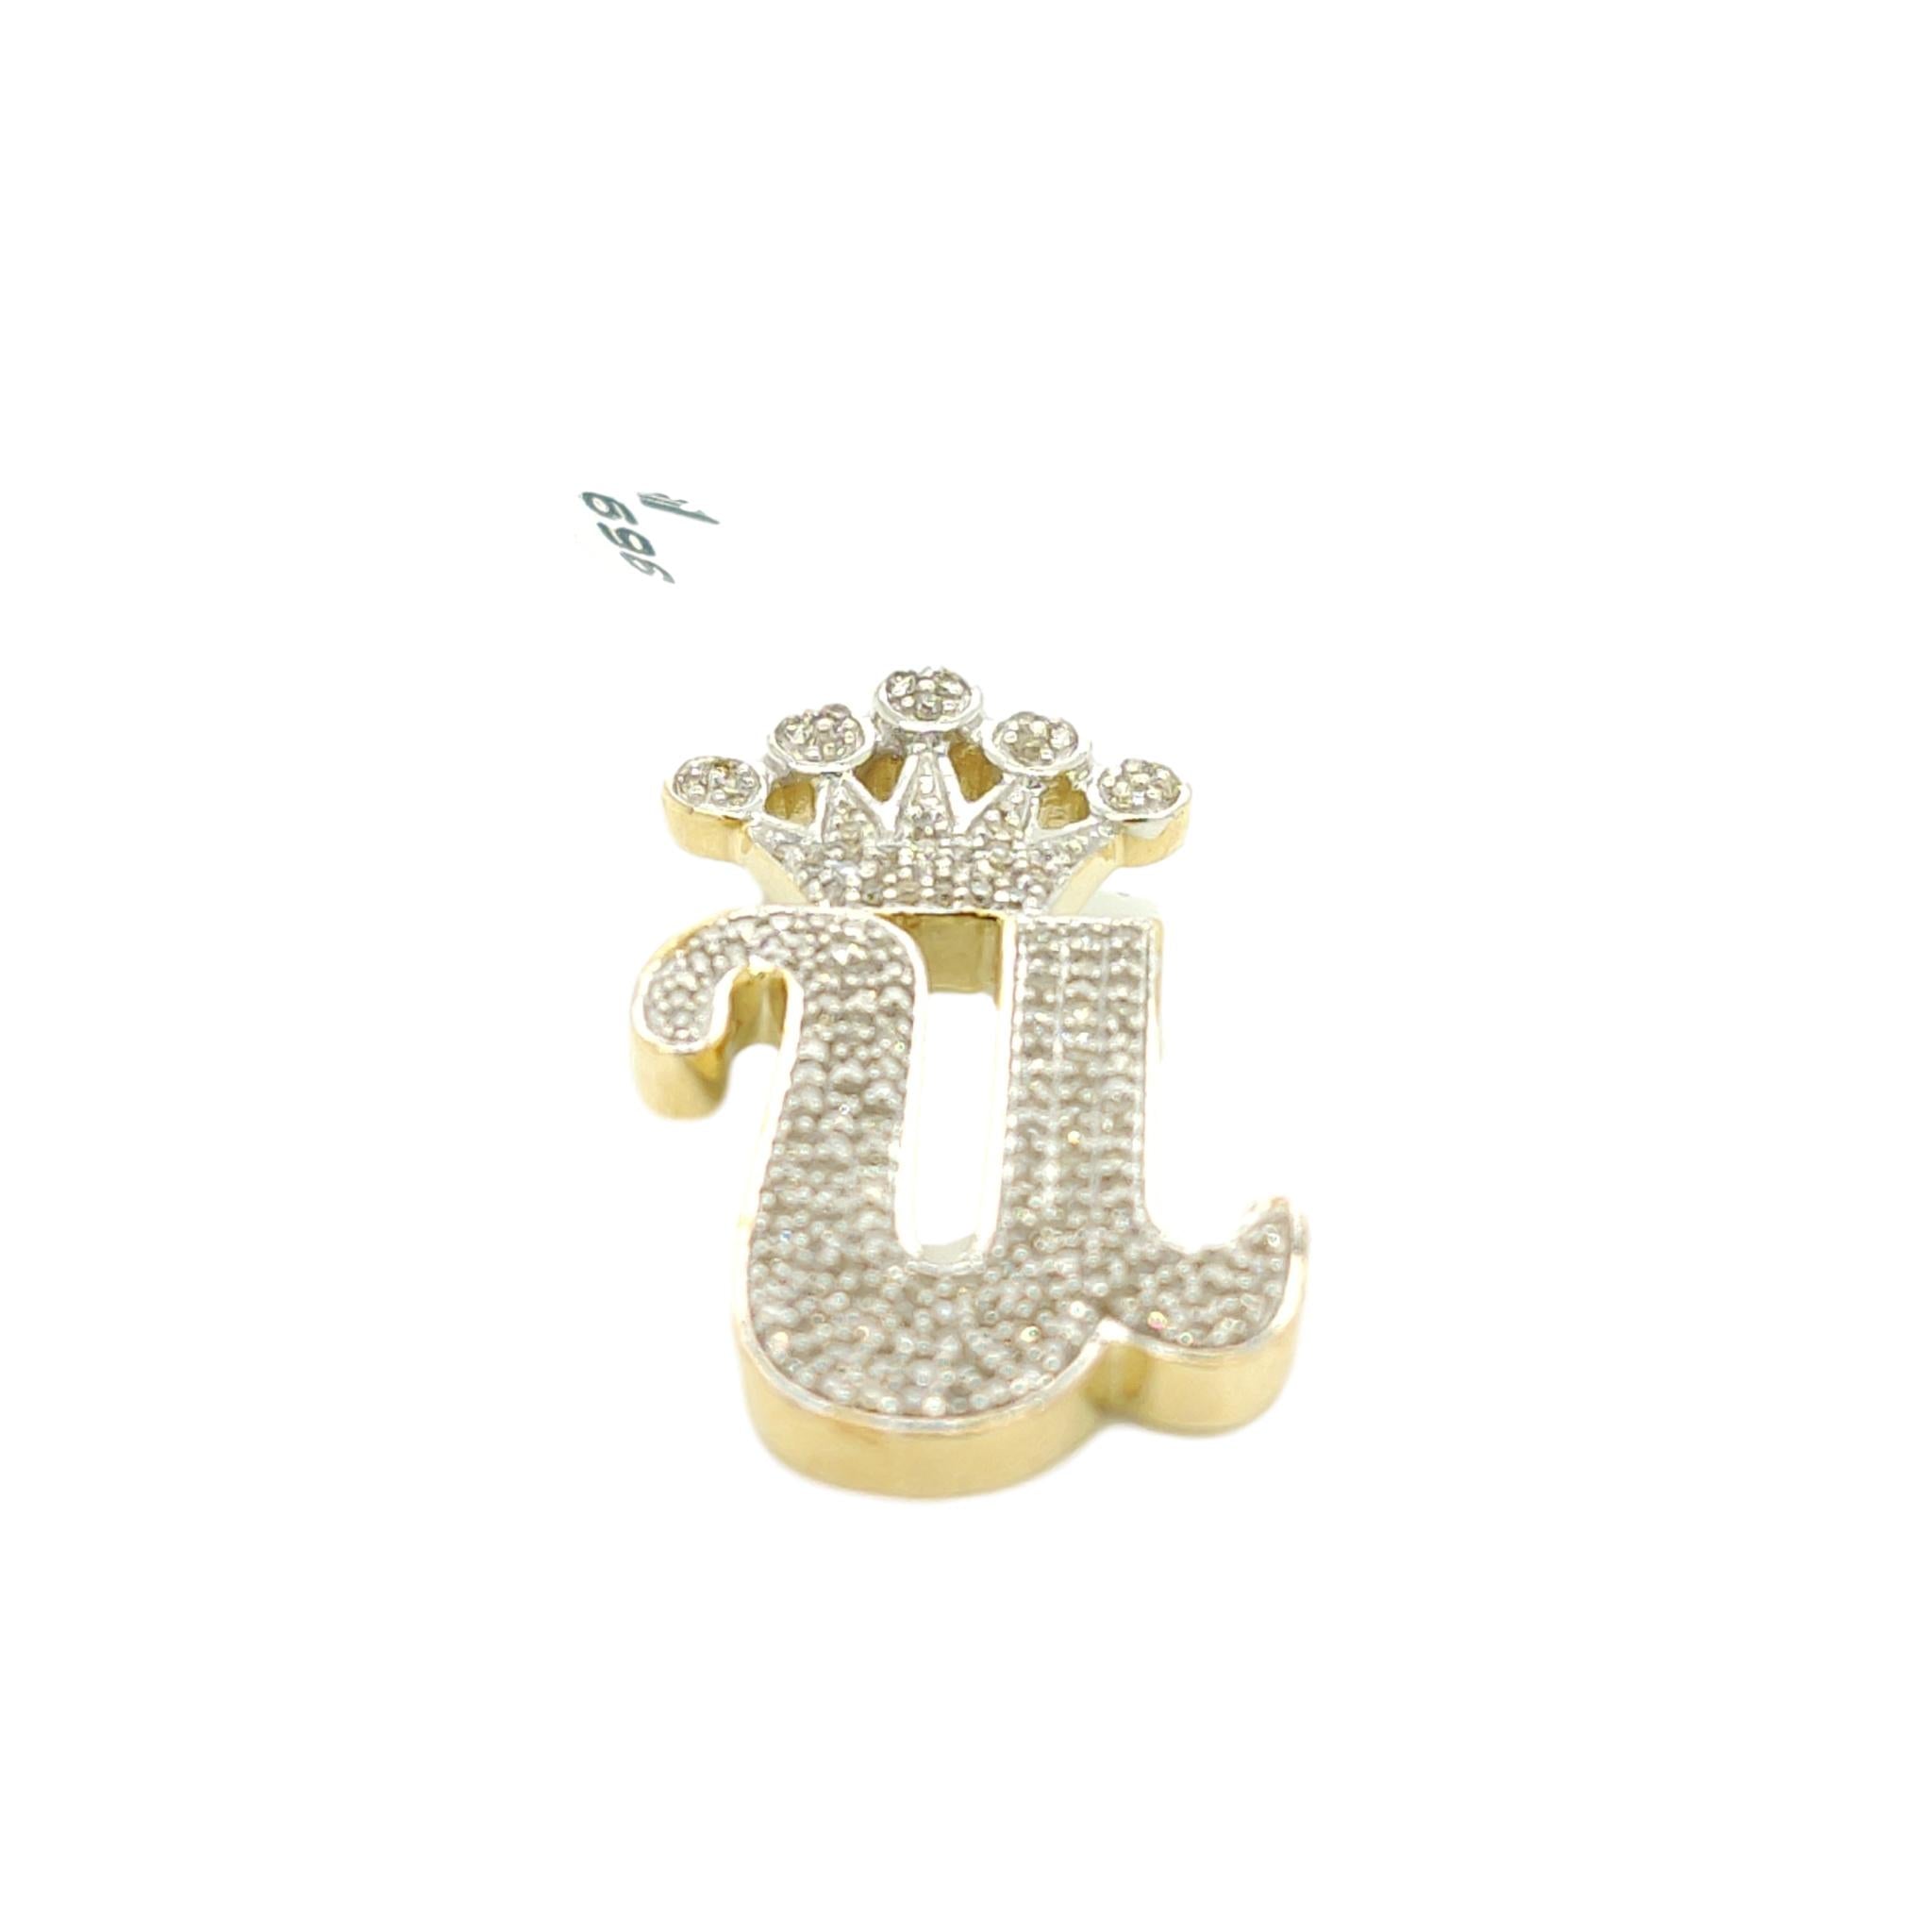 10K Yellow Gold Diamond U Letter Charm with Crown Small Size